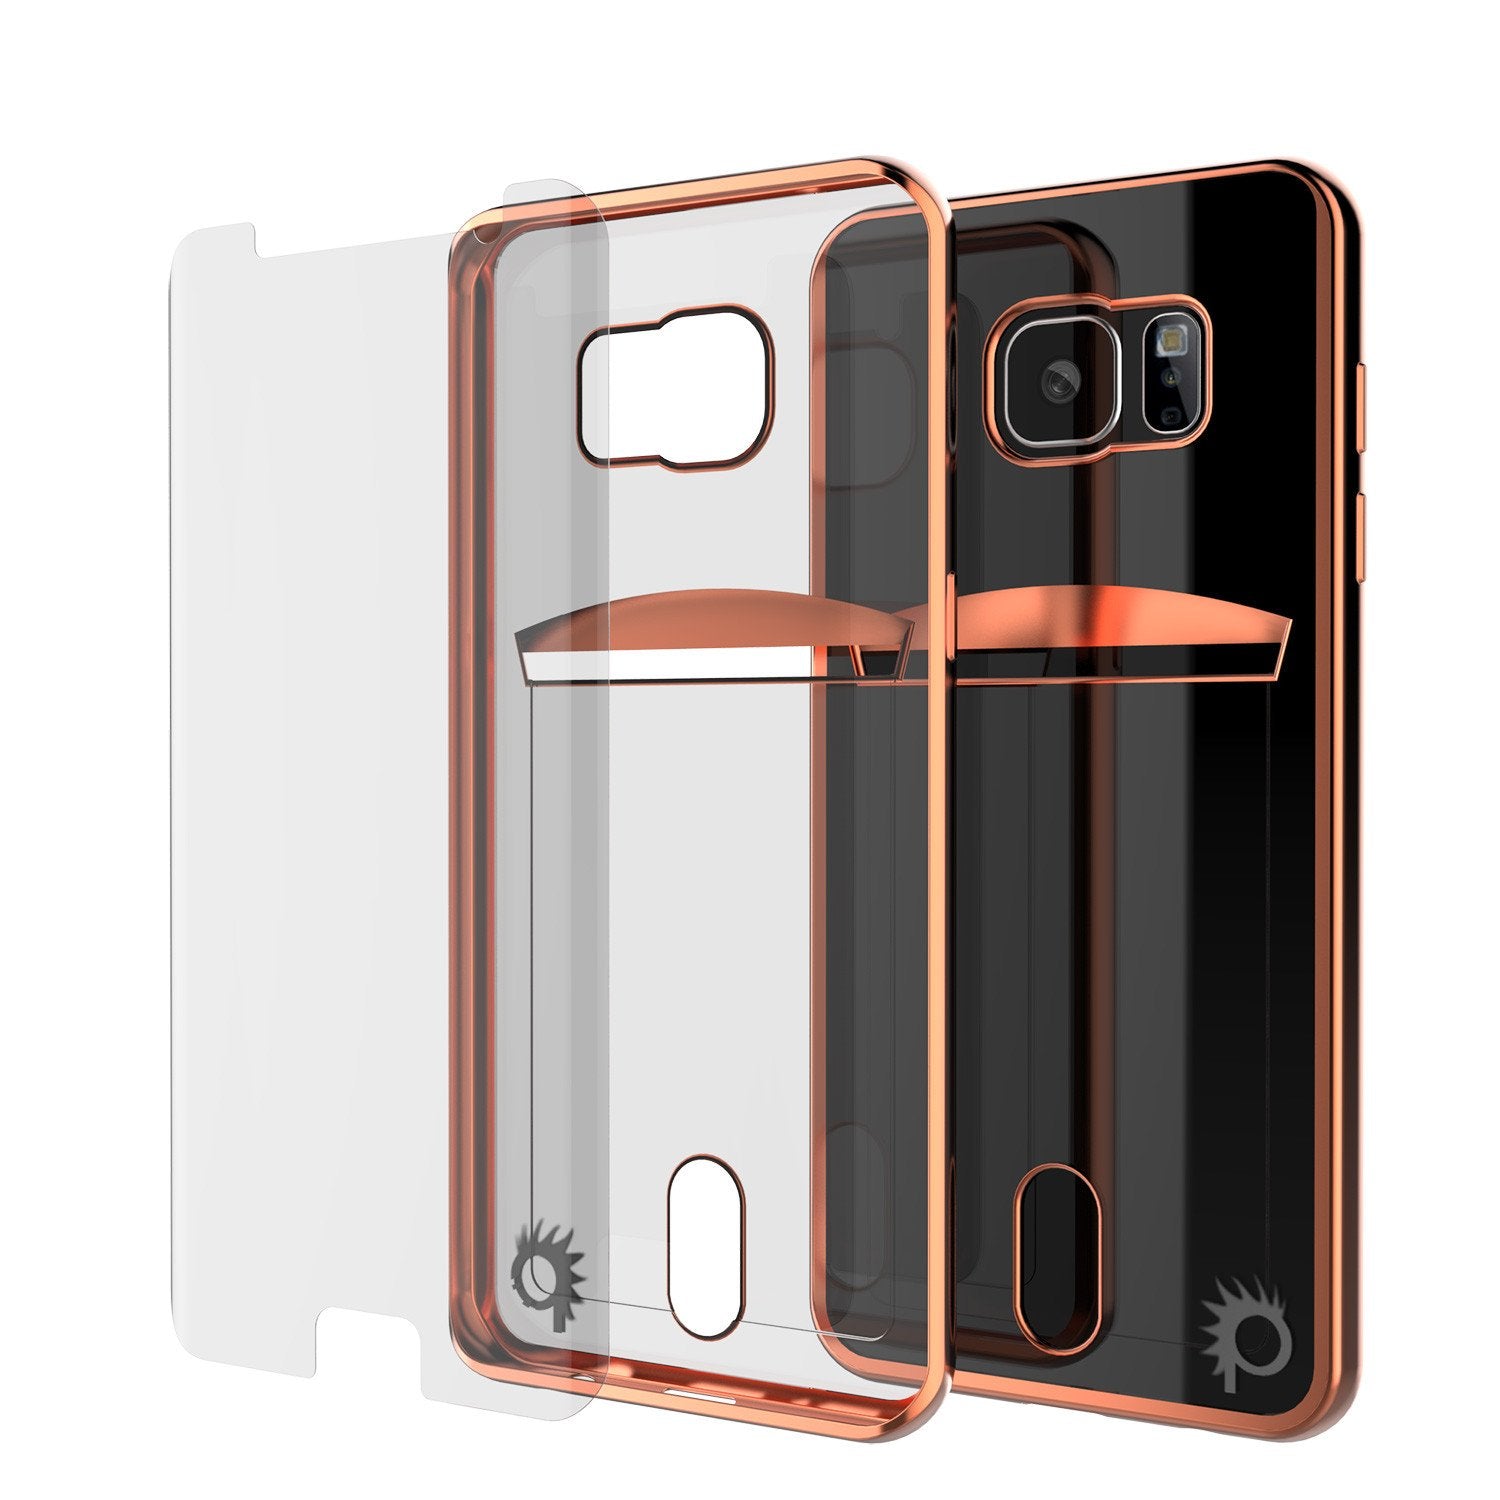 Galaxy S6 EDGE+ Plus Case, PUNKCASE® LUCID Rose Gold Series | Card Slot | SHIELD Screen Protector - PunkCase NZ